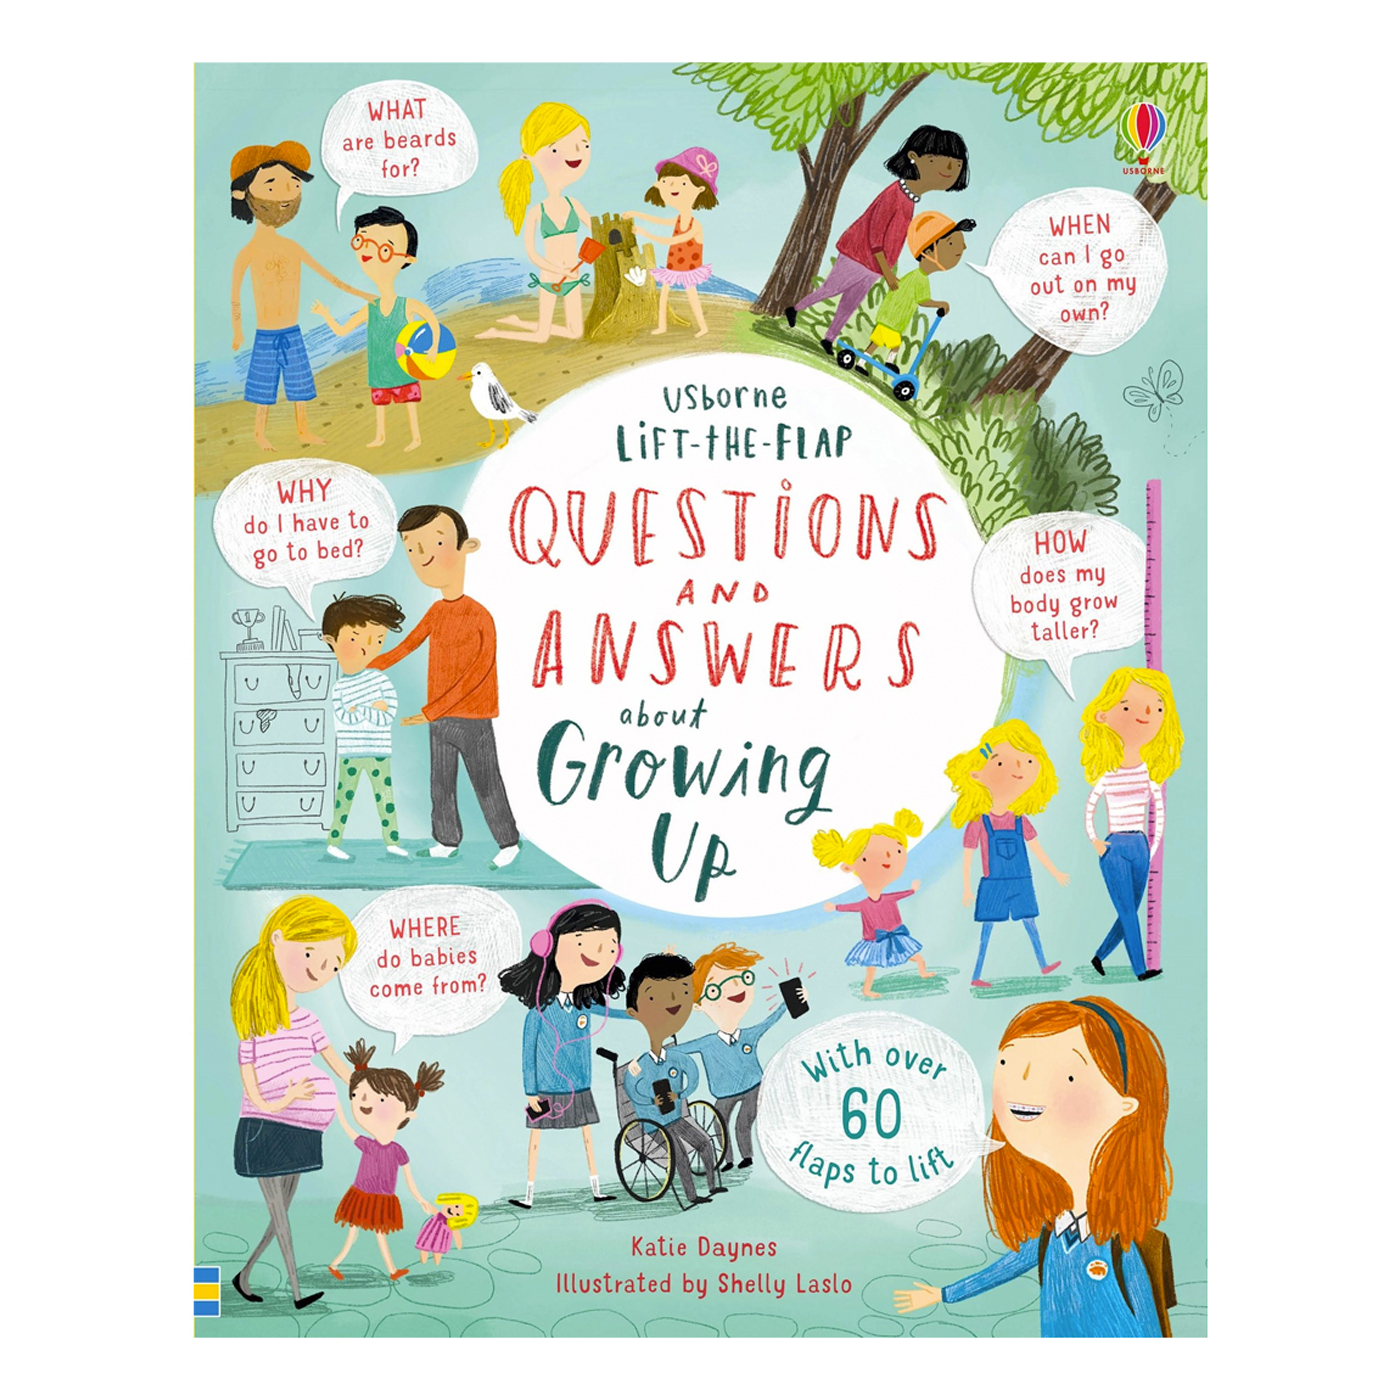 USBORNE Lift-the-flap Questions and Answers about Growing Up